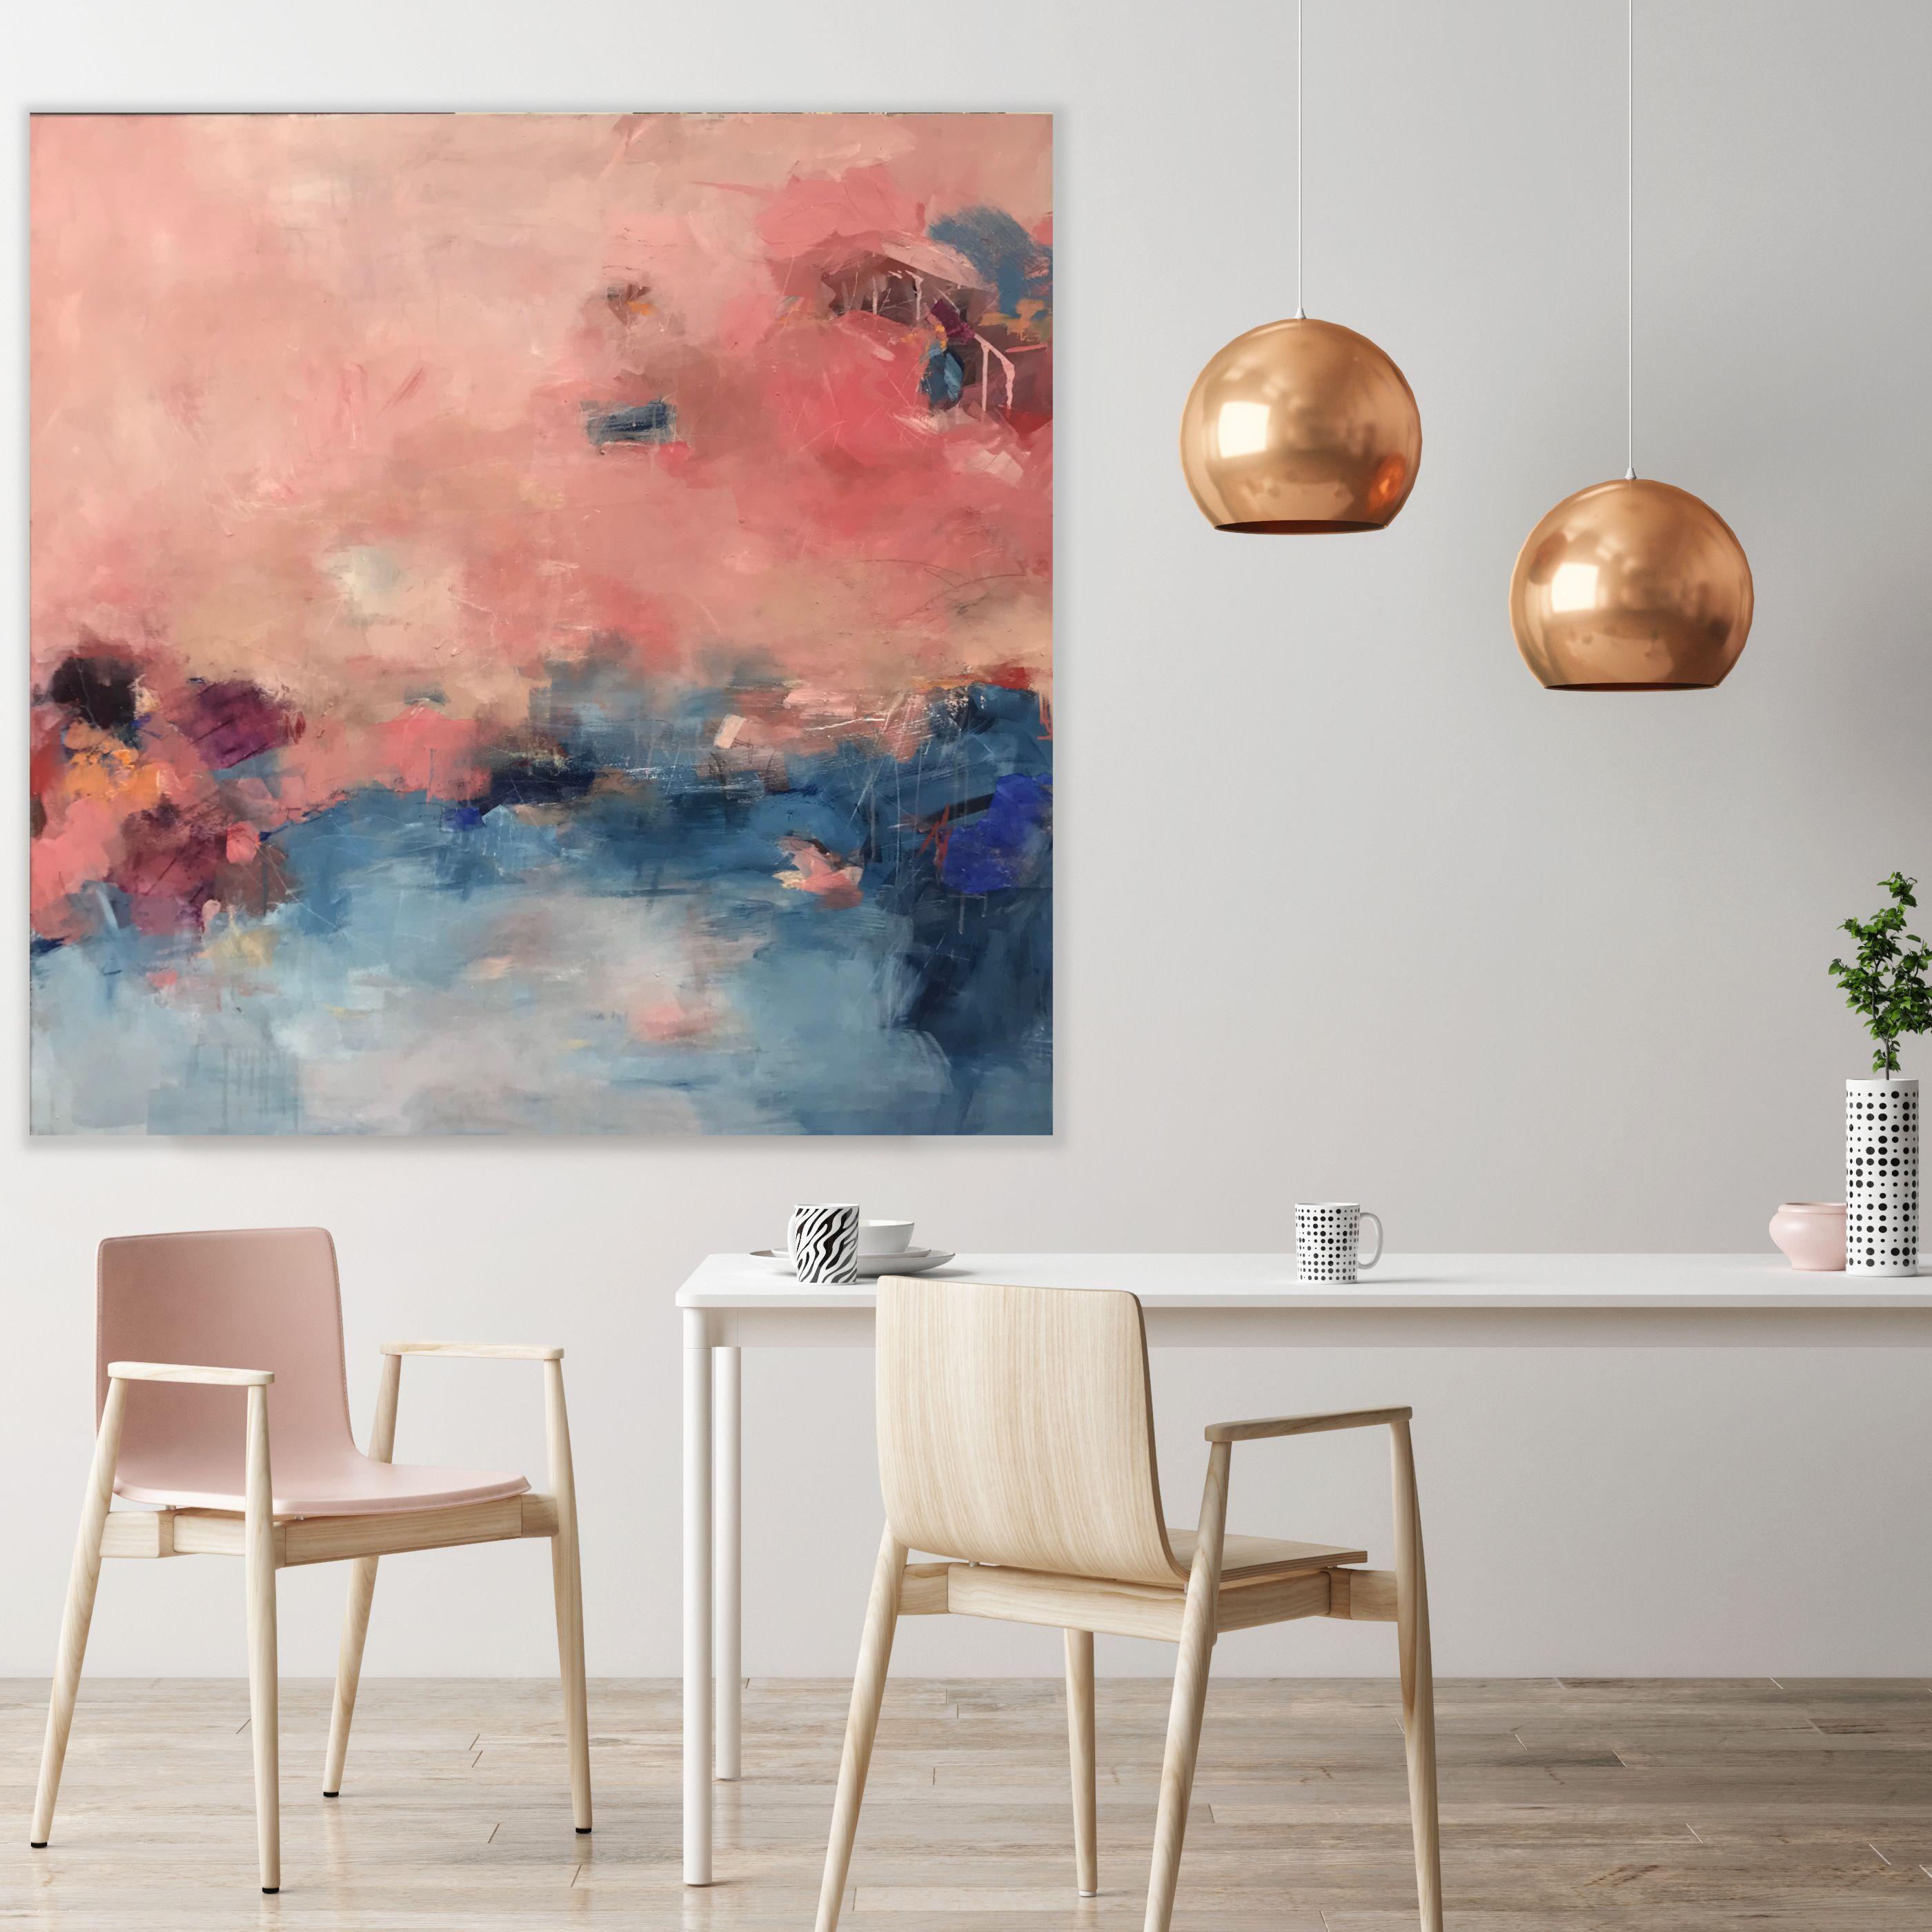 This painting has been built over many thin layers of paint and grew out of a slow process. The starting point for this piece has been the soft colour scheme. Its palette attempts to capture a mood of dreaminess and lightness.    I enjoyed bold